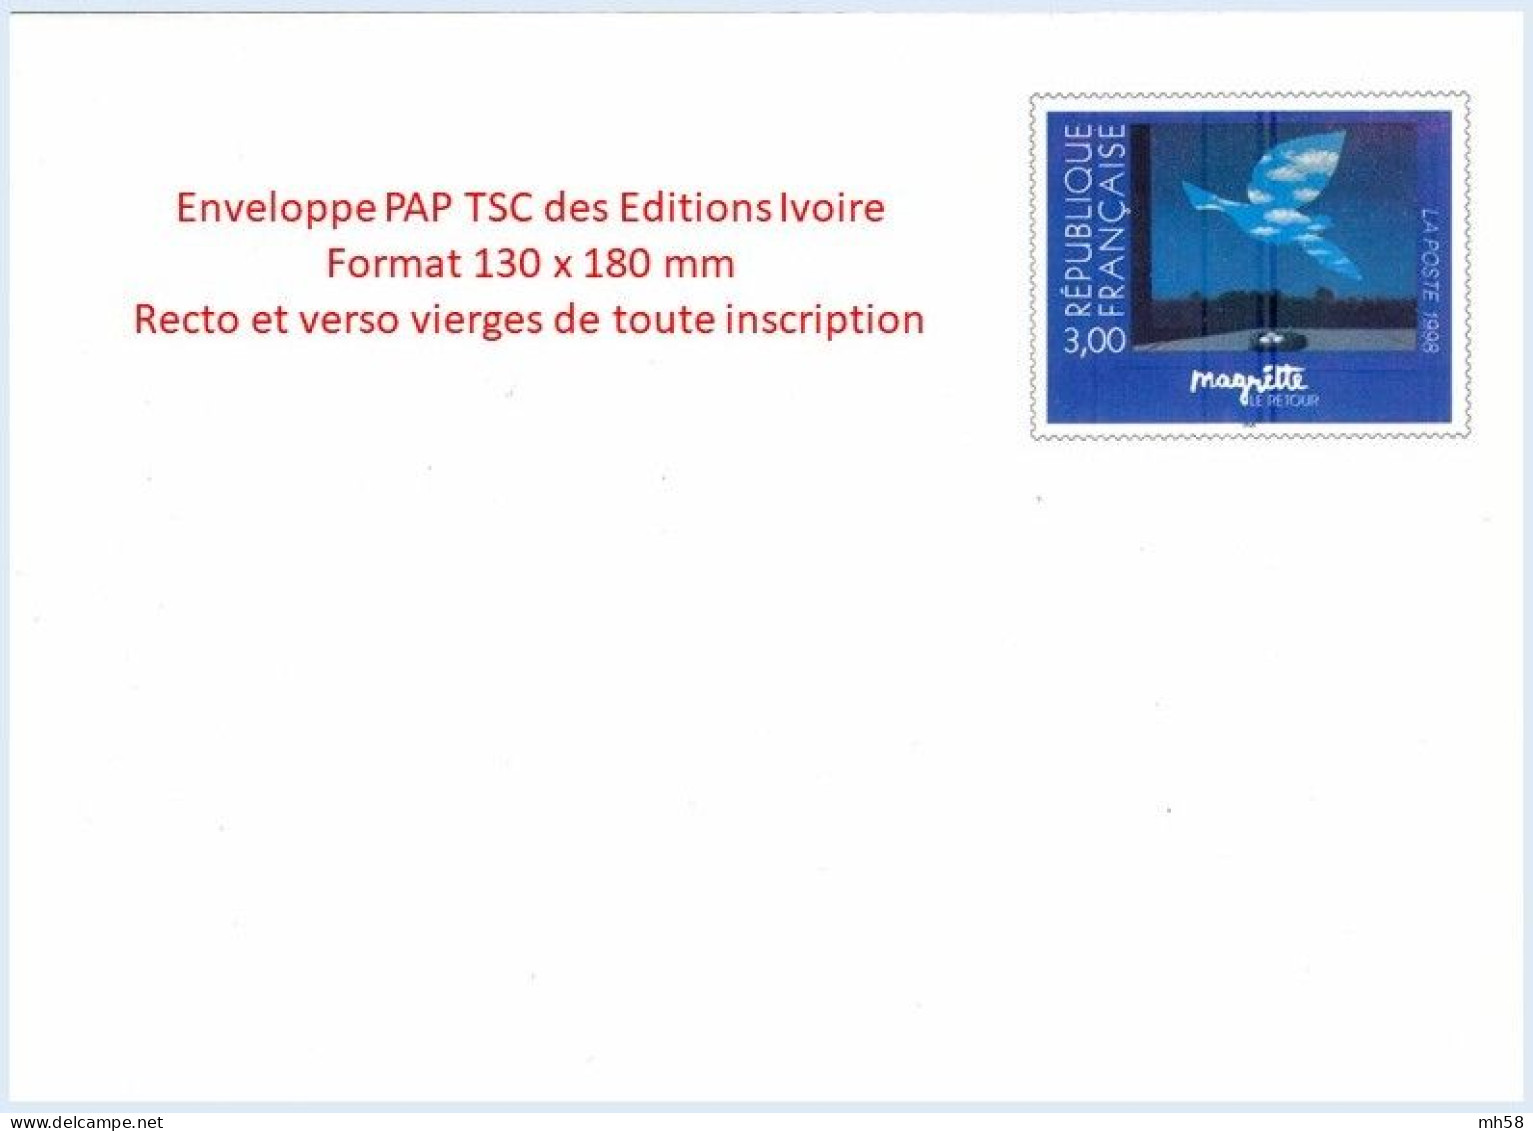 Entier FRANCE - PAP Enveloppe TSC Editions Ivoire Neuf ** - 3f00 Magritte - PAP : Su Commissione Privata TSC E Sovrastampe Semi-ufficiali